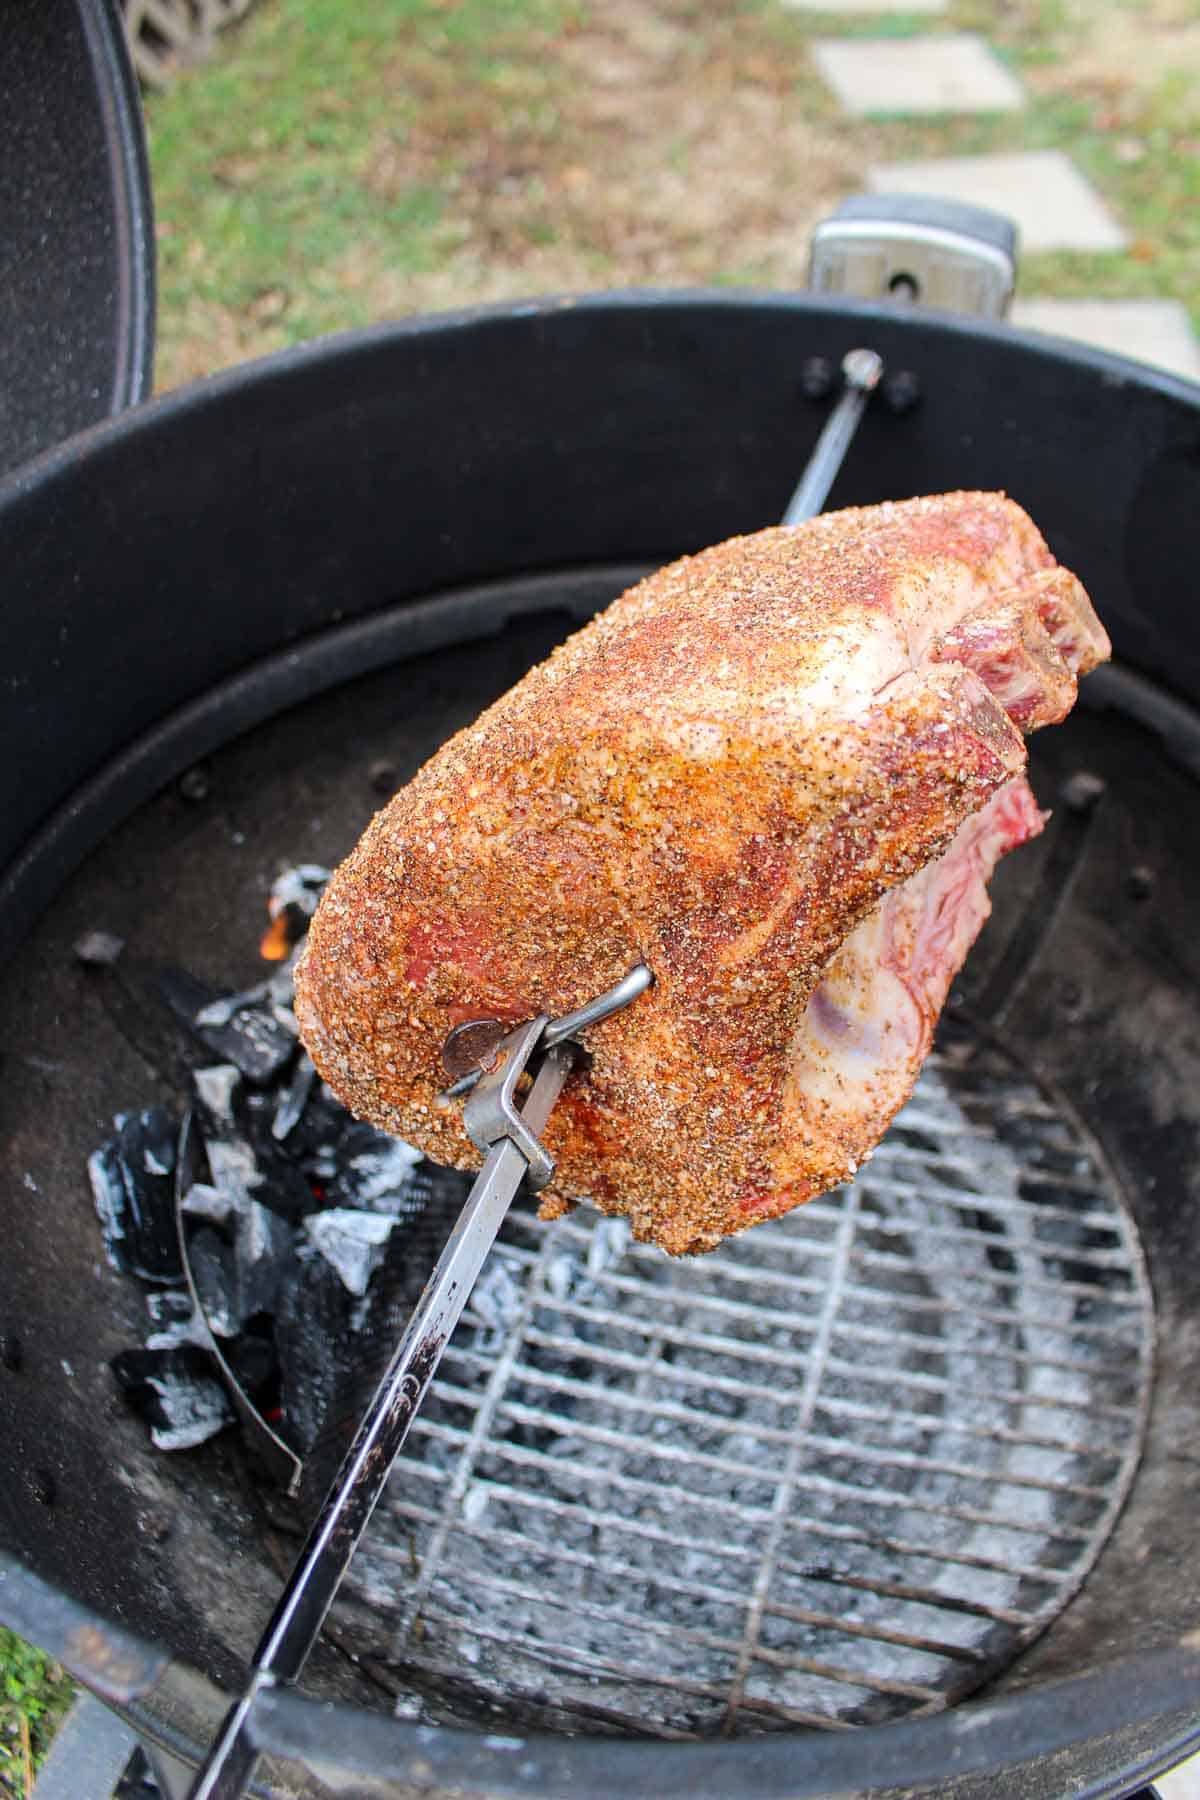 Adding the Rotisserie Prime Rib to the Grill